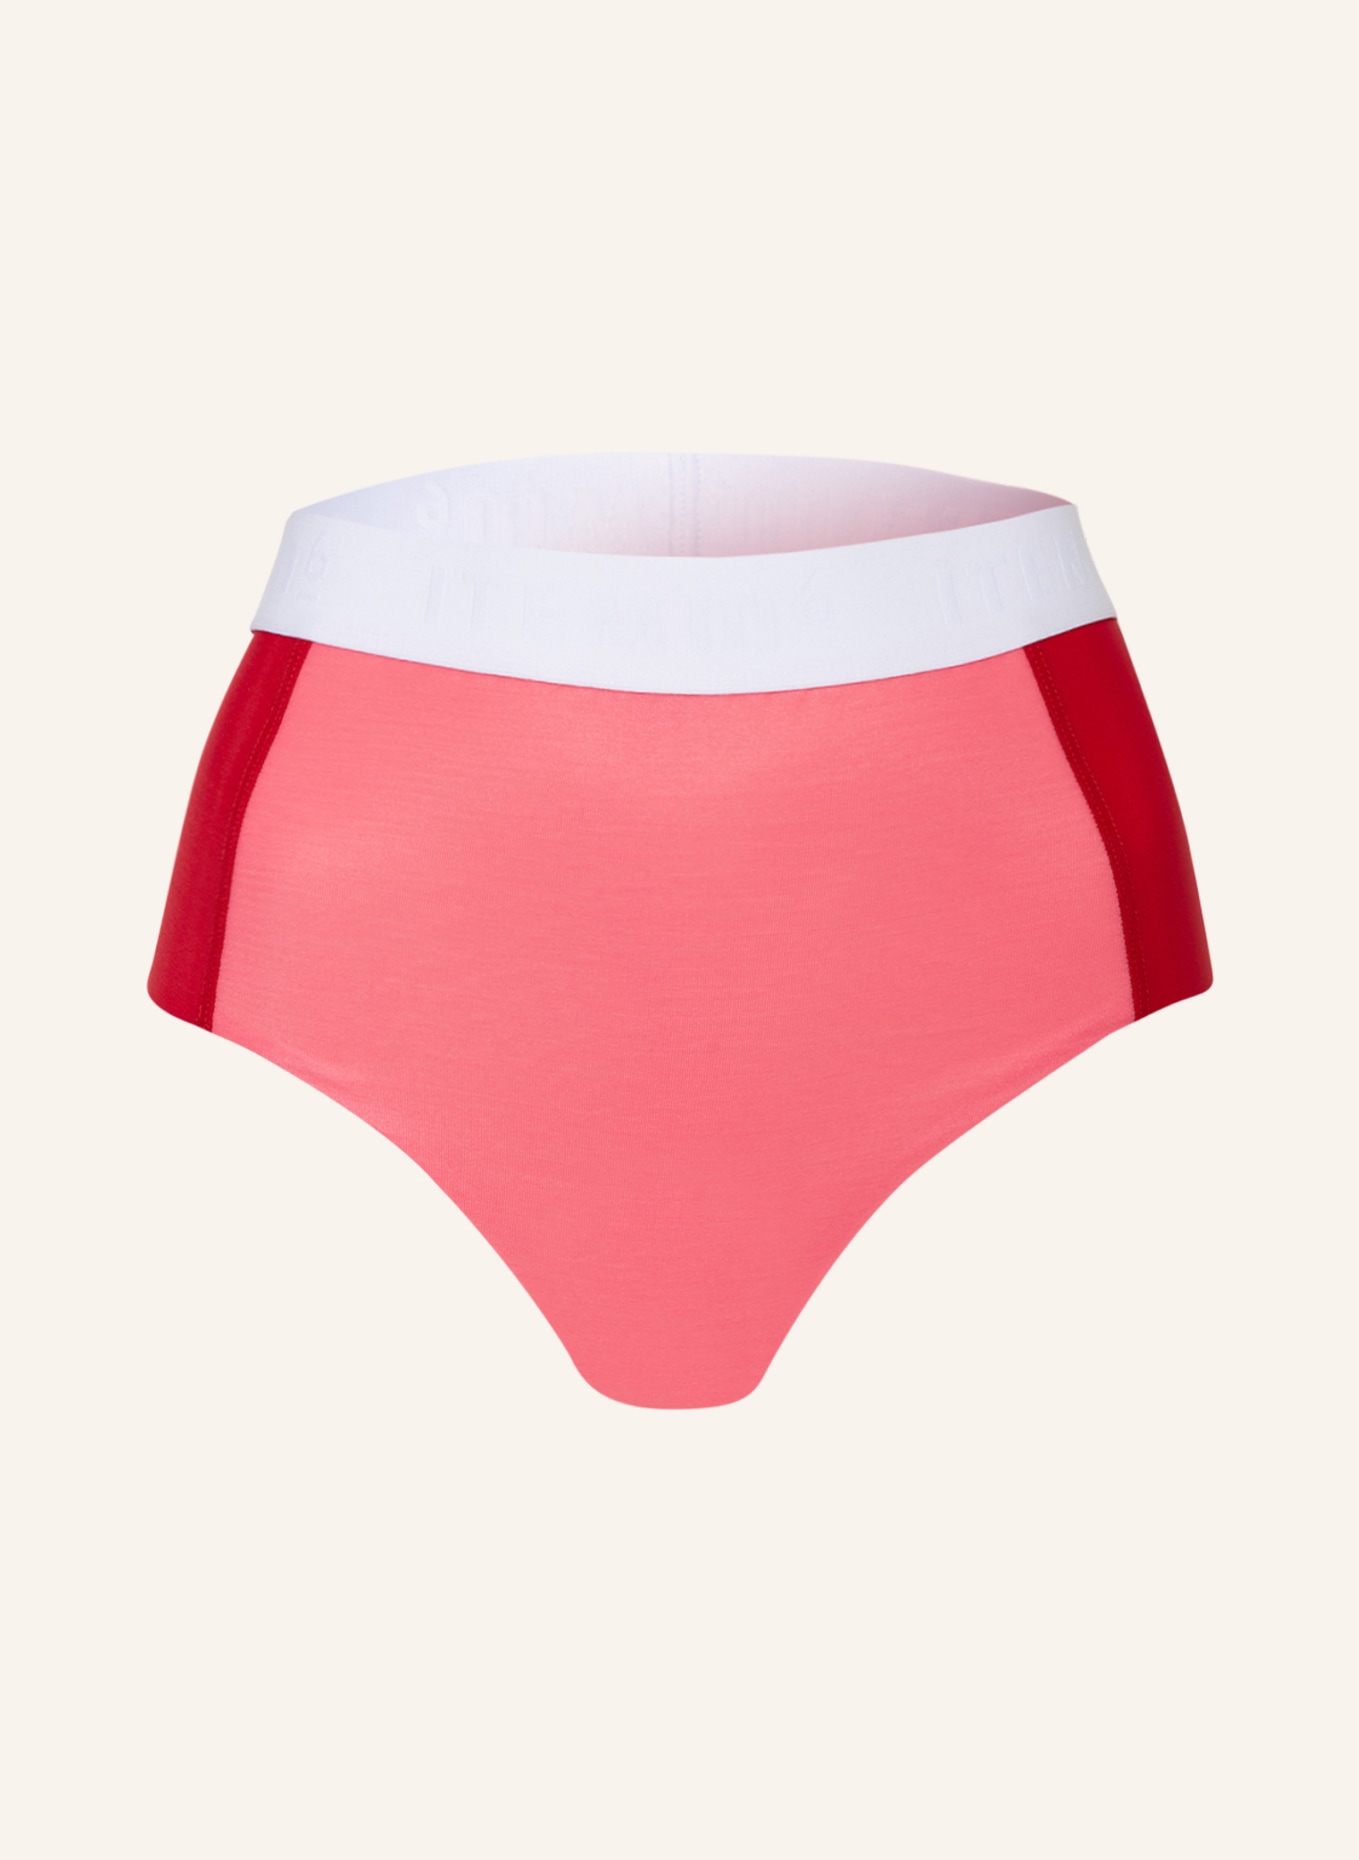 ITEM m6 Shaping briefs ALL MESH, Color: RED/ PINK (Image 1)